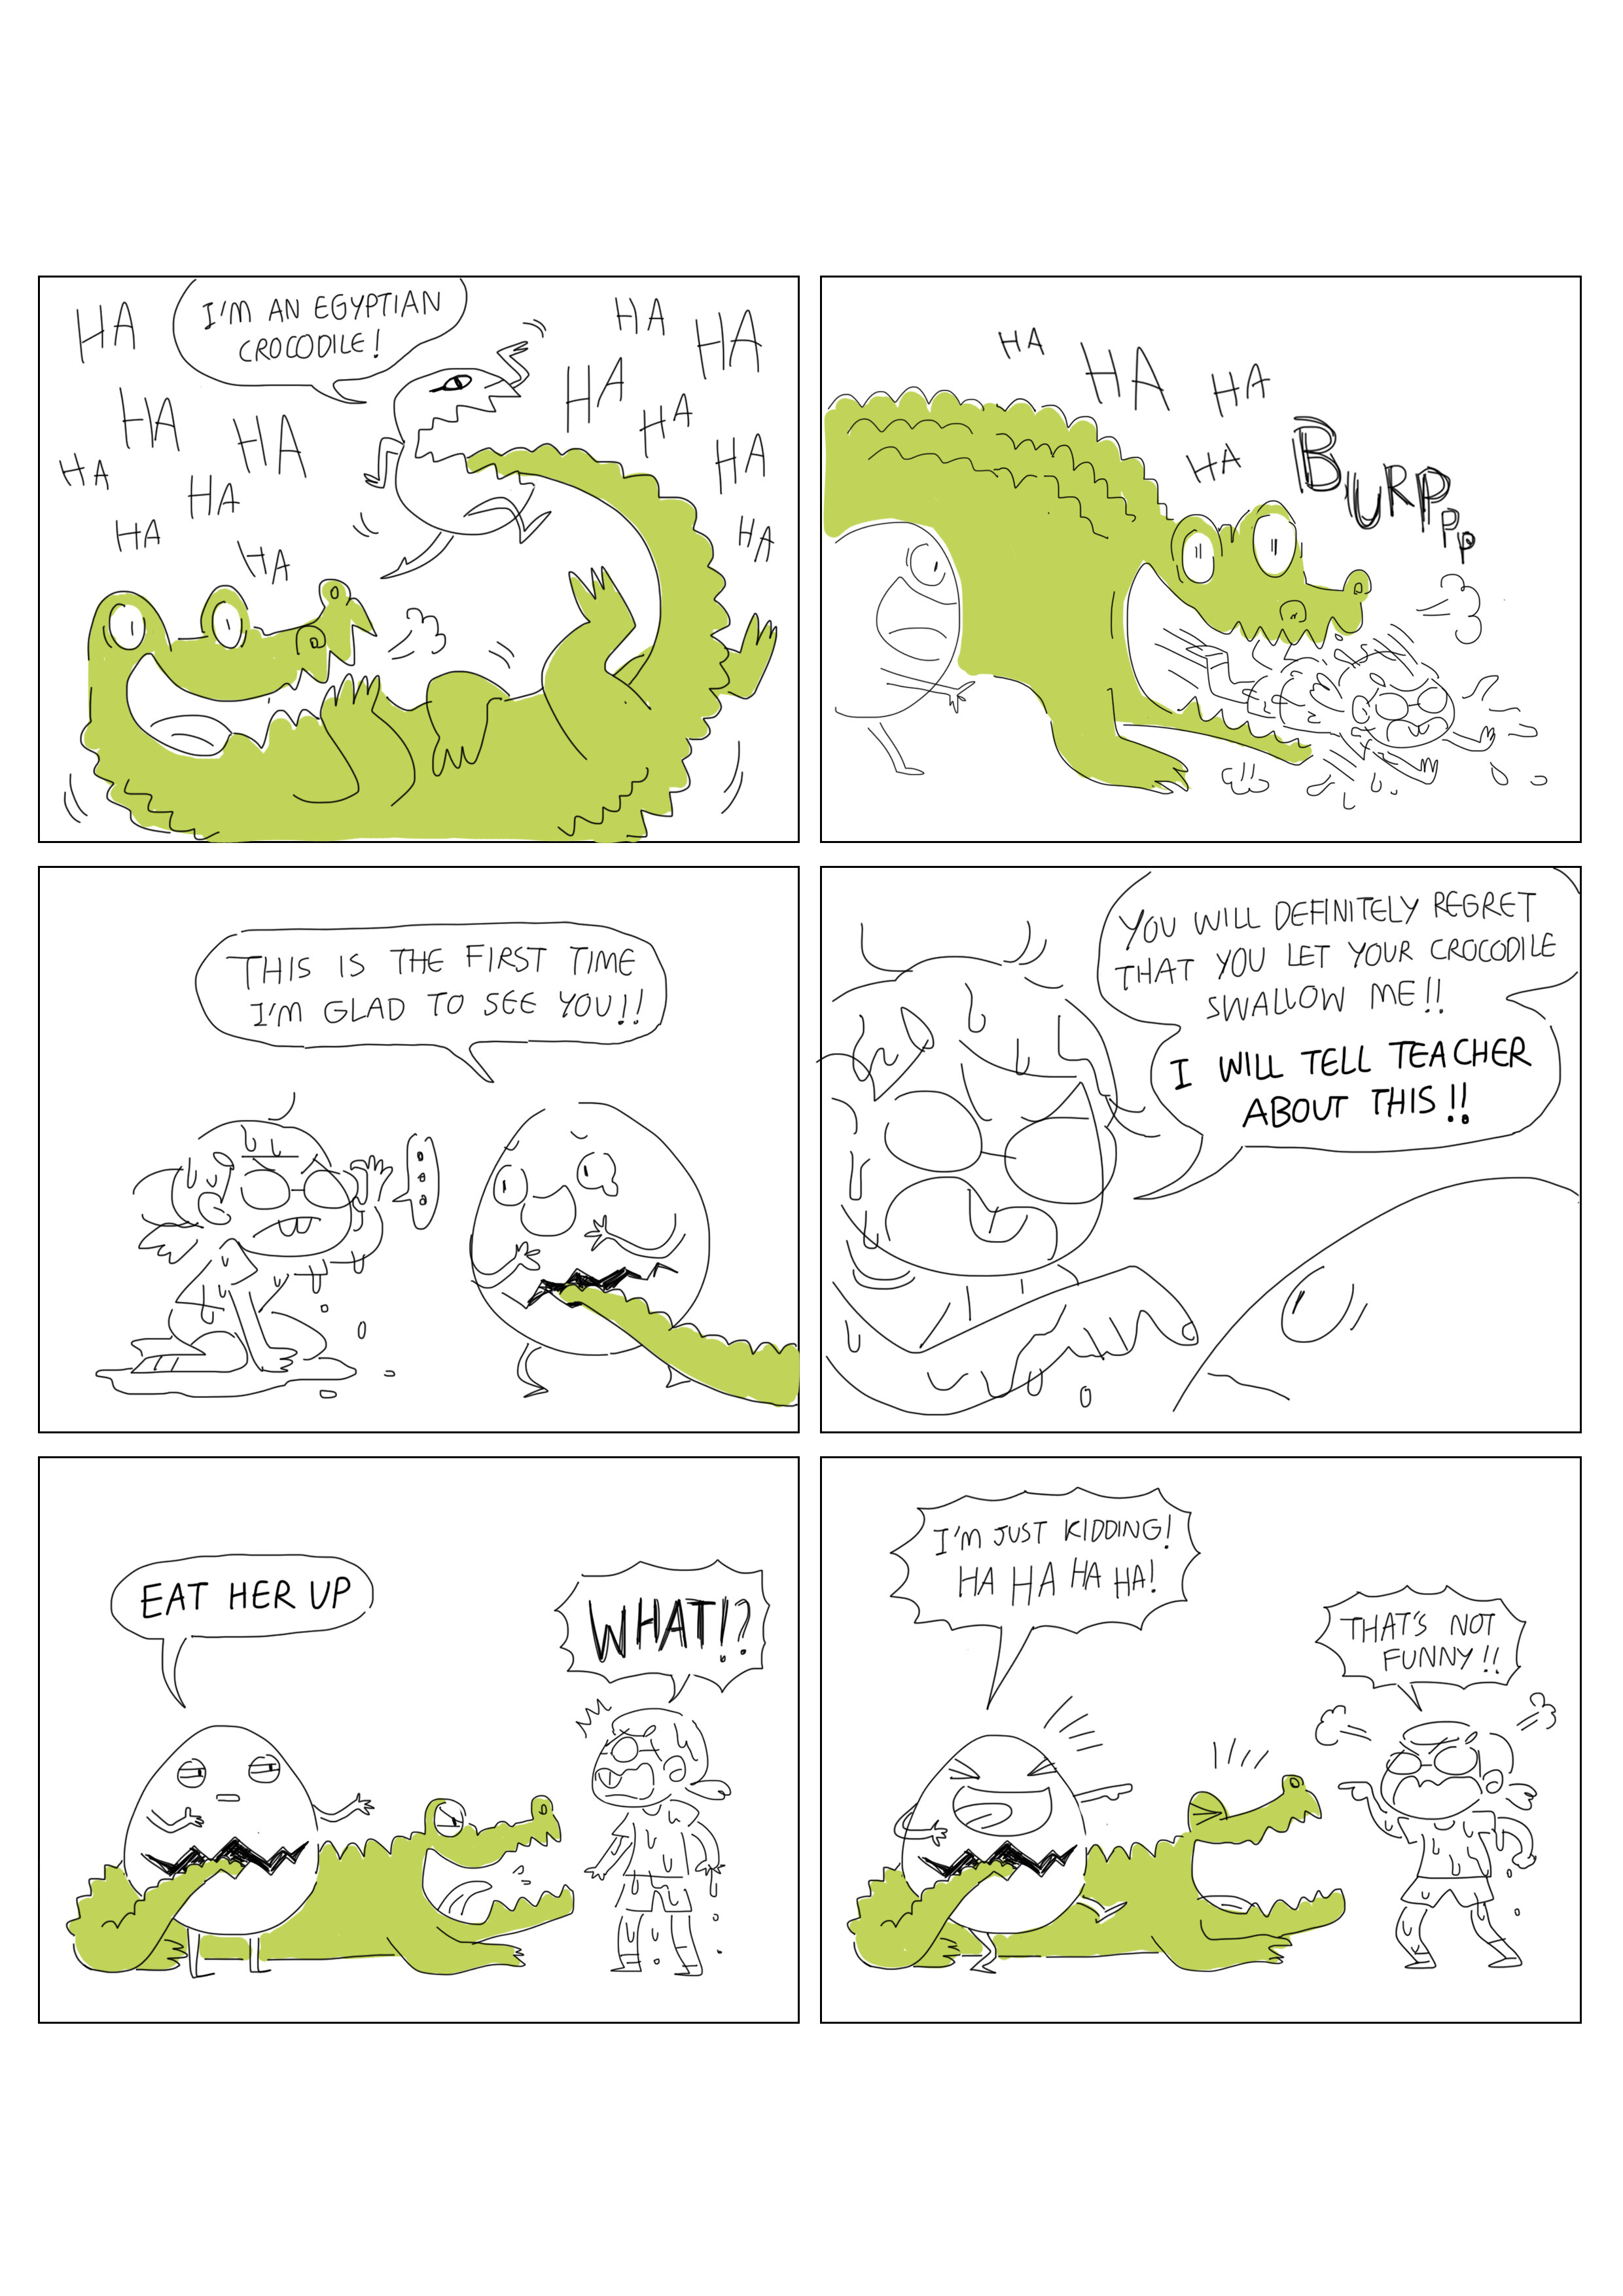 Storyboard for the picture book “Eggy and The Crazy Crocodile”. 